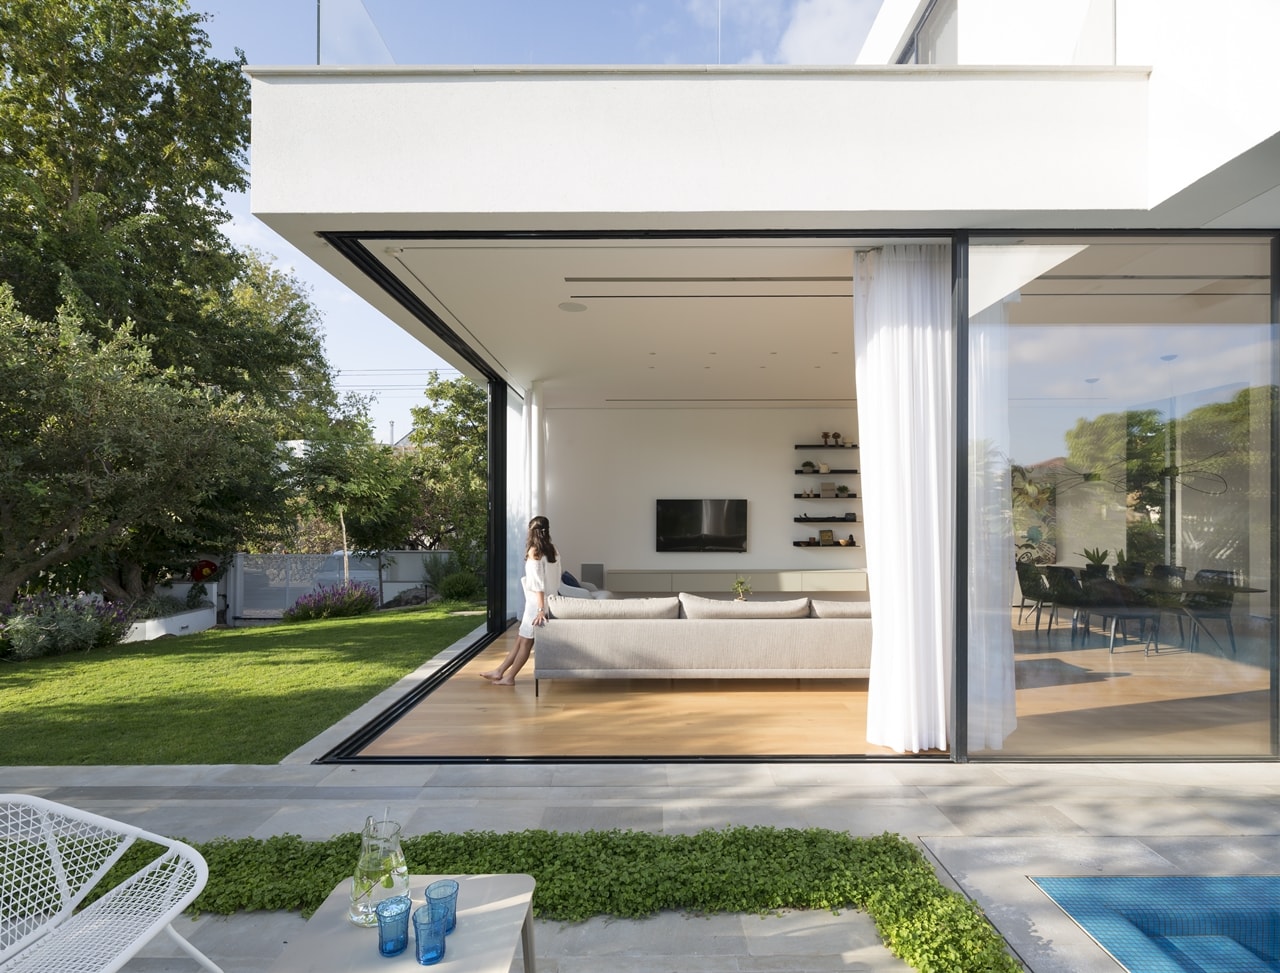 Large sliding glass doors open in modern LB house by Shachar Rozenfeld Architects